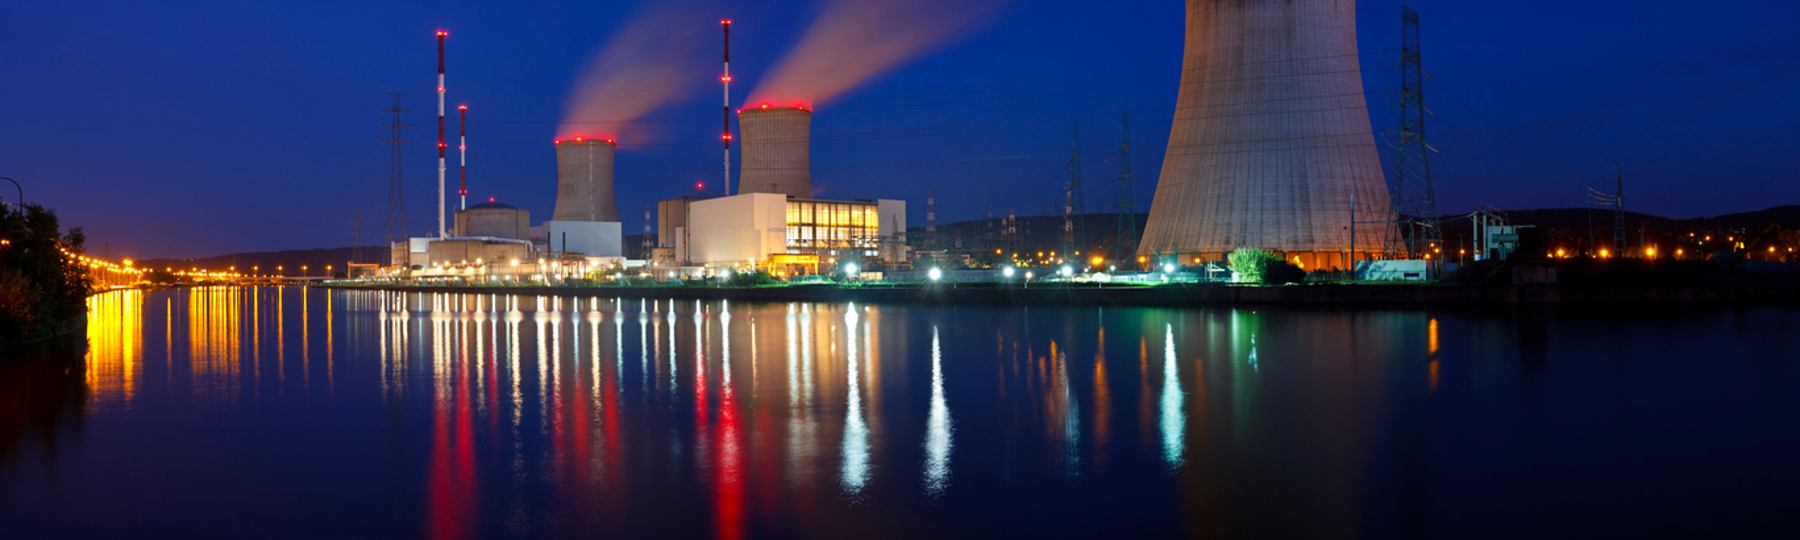 Nuclear energy is a promising solution for climate change